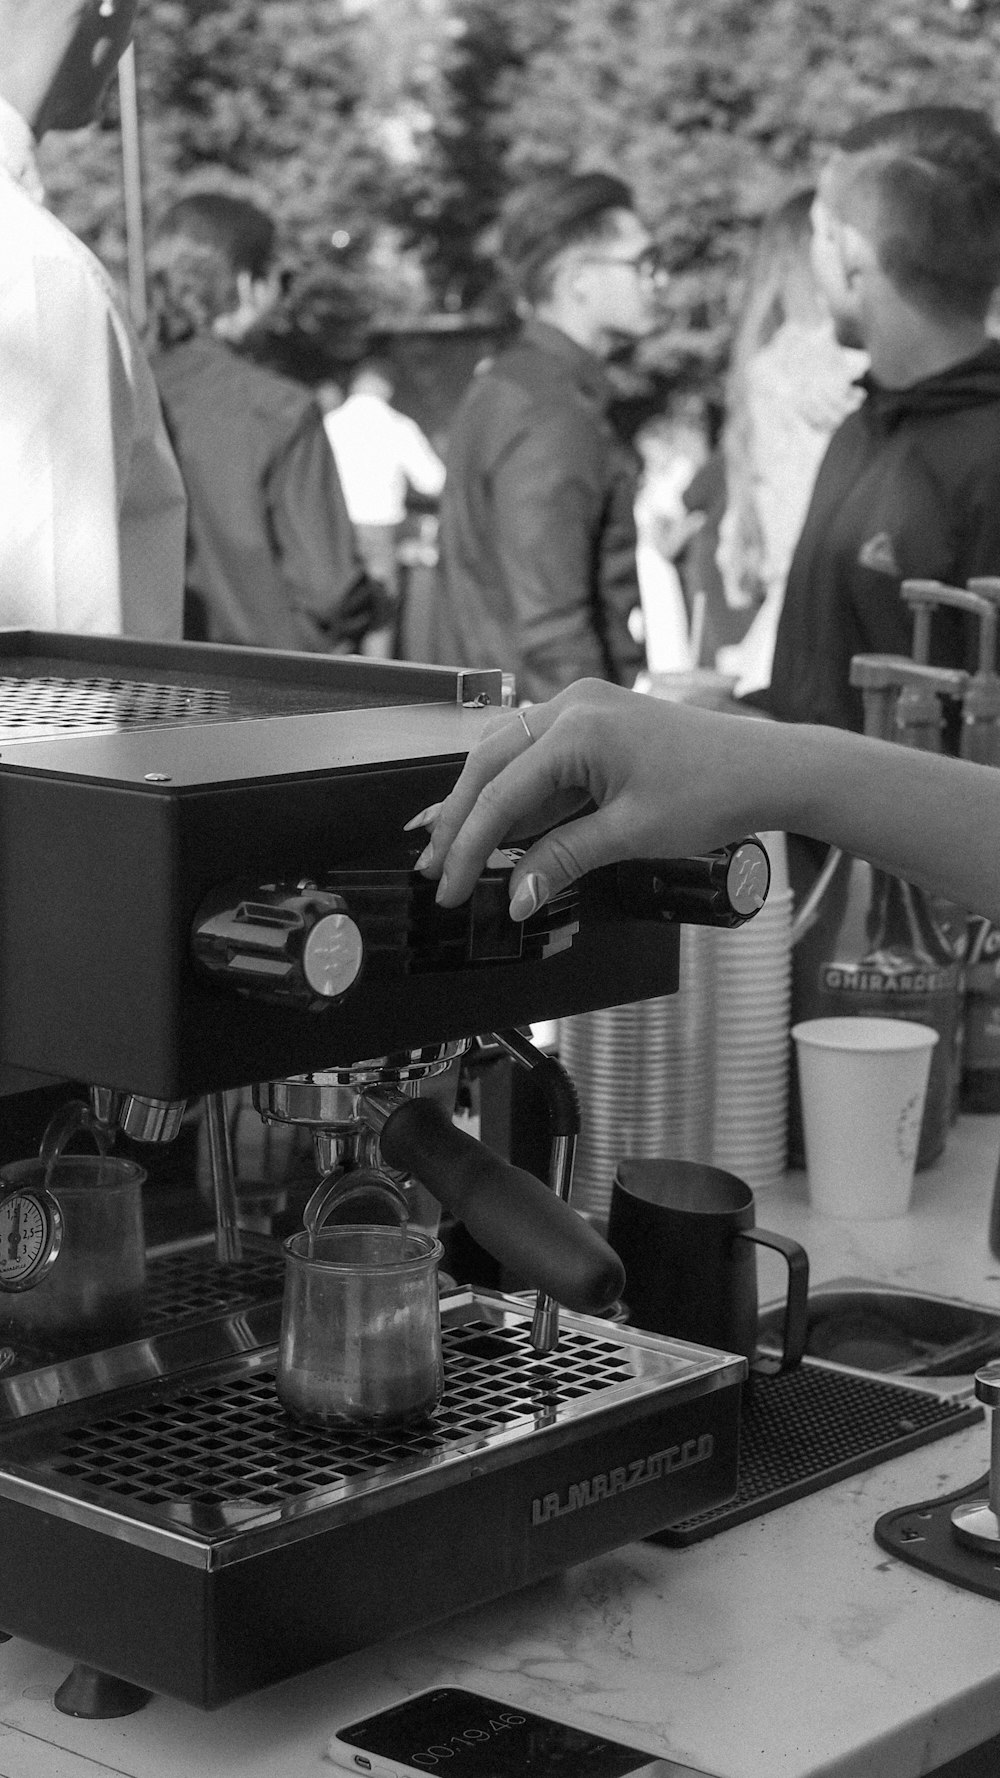 a black and white photo of a person using a coffee machine